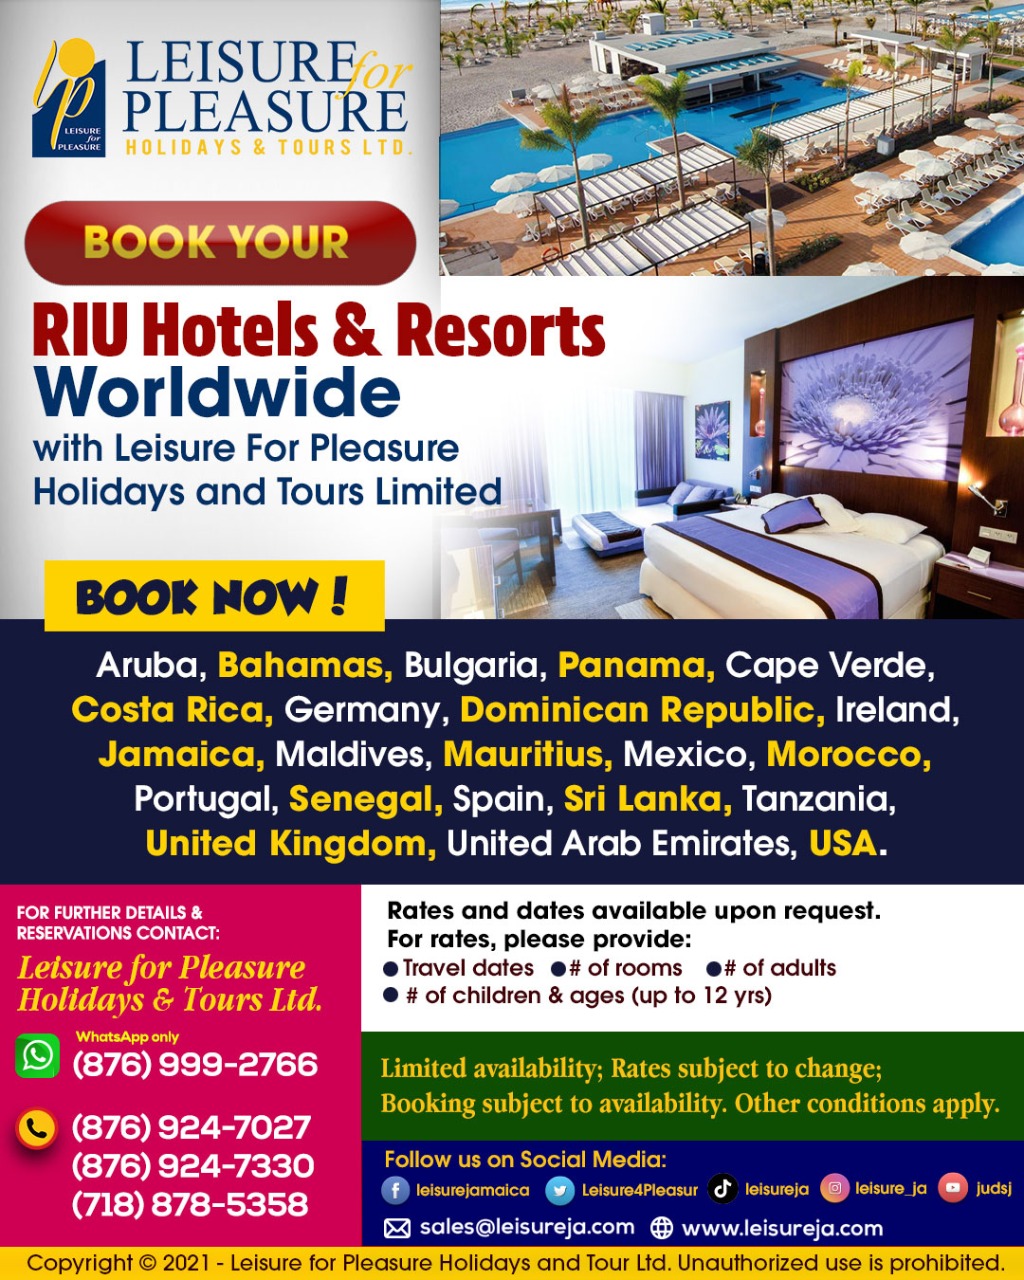 Book your RIU Hotels and Resorts Worldwide with Leisure For Pleasure Holidays and Tours Limited